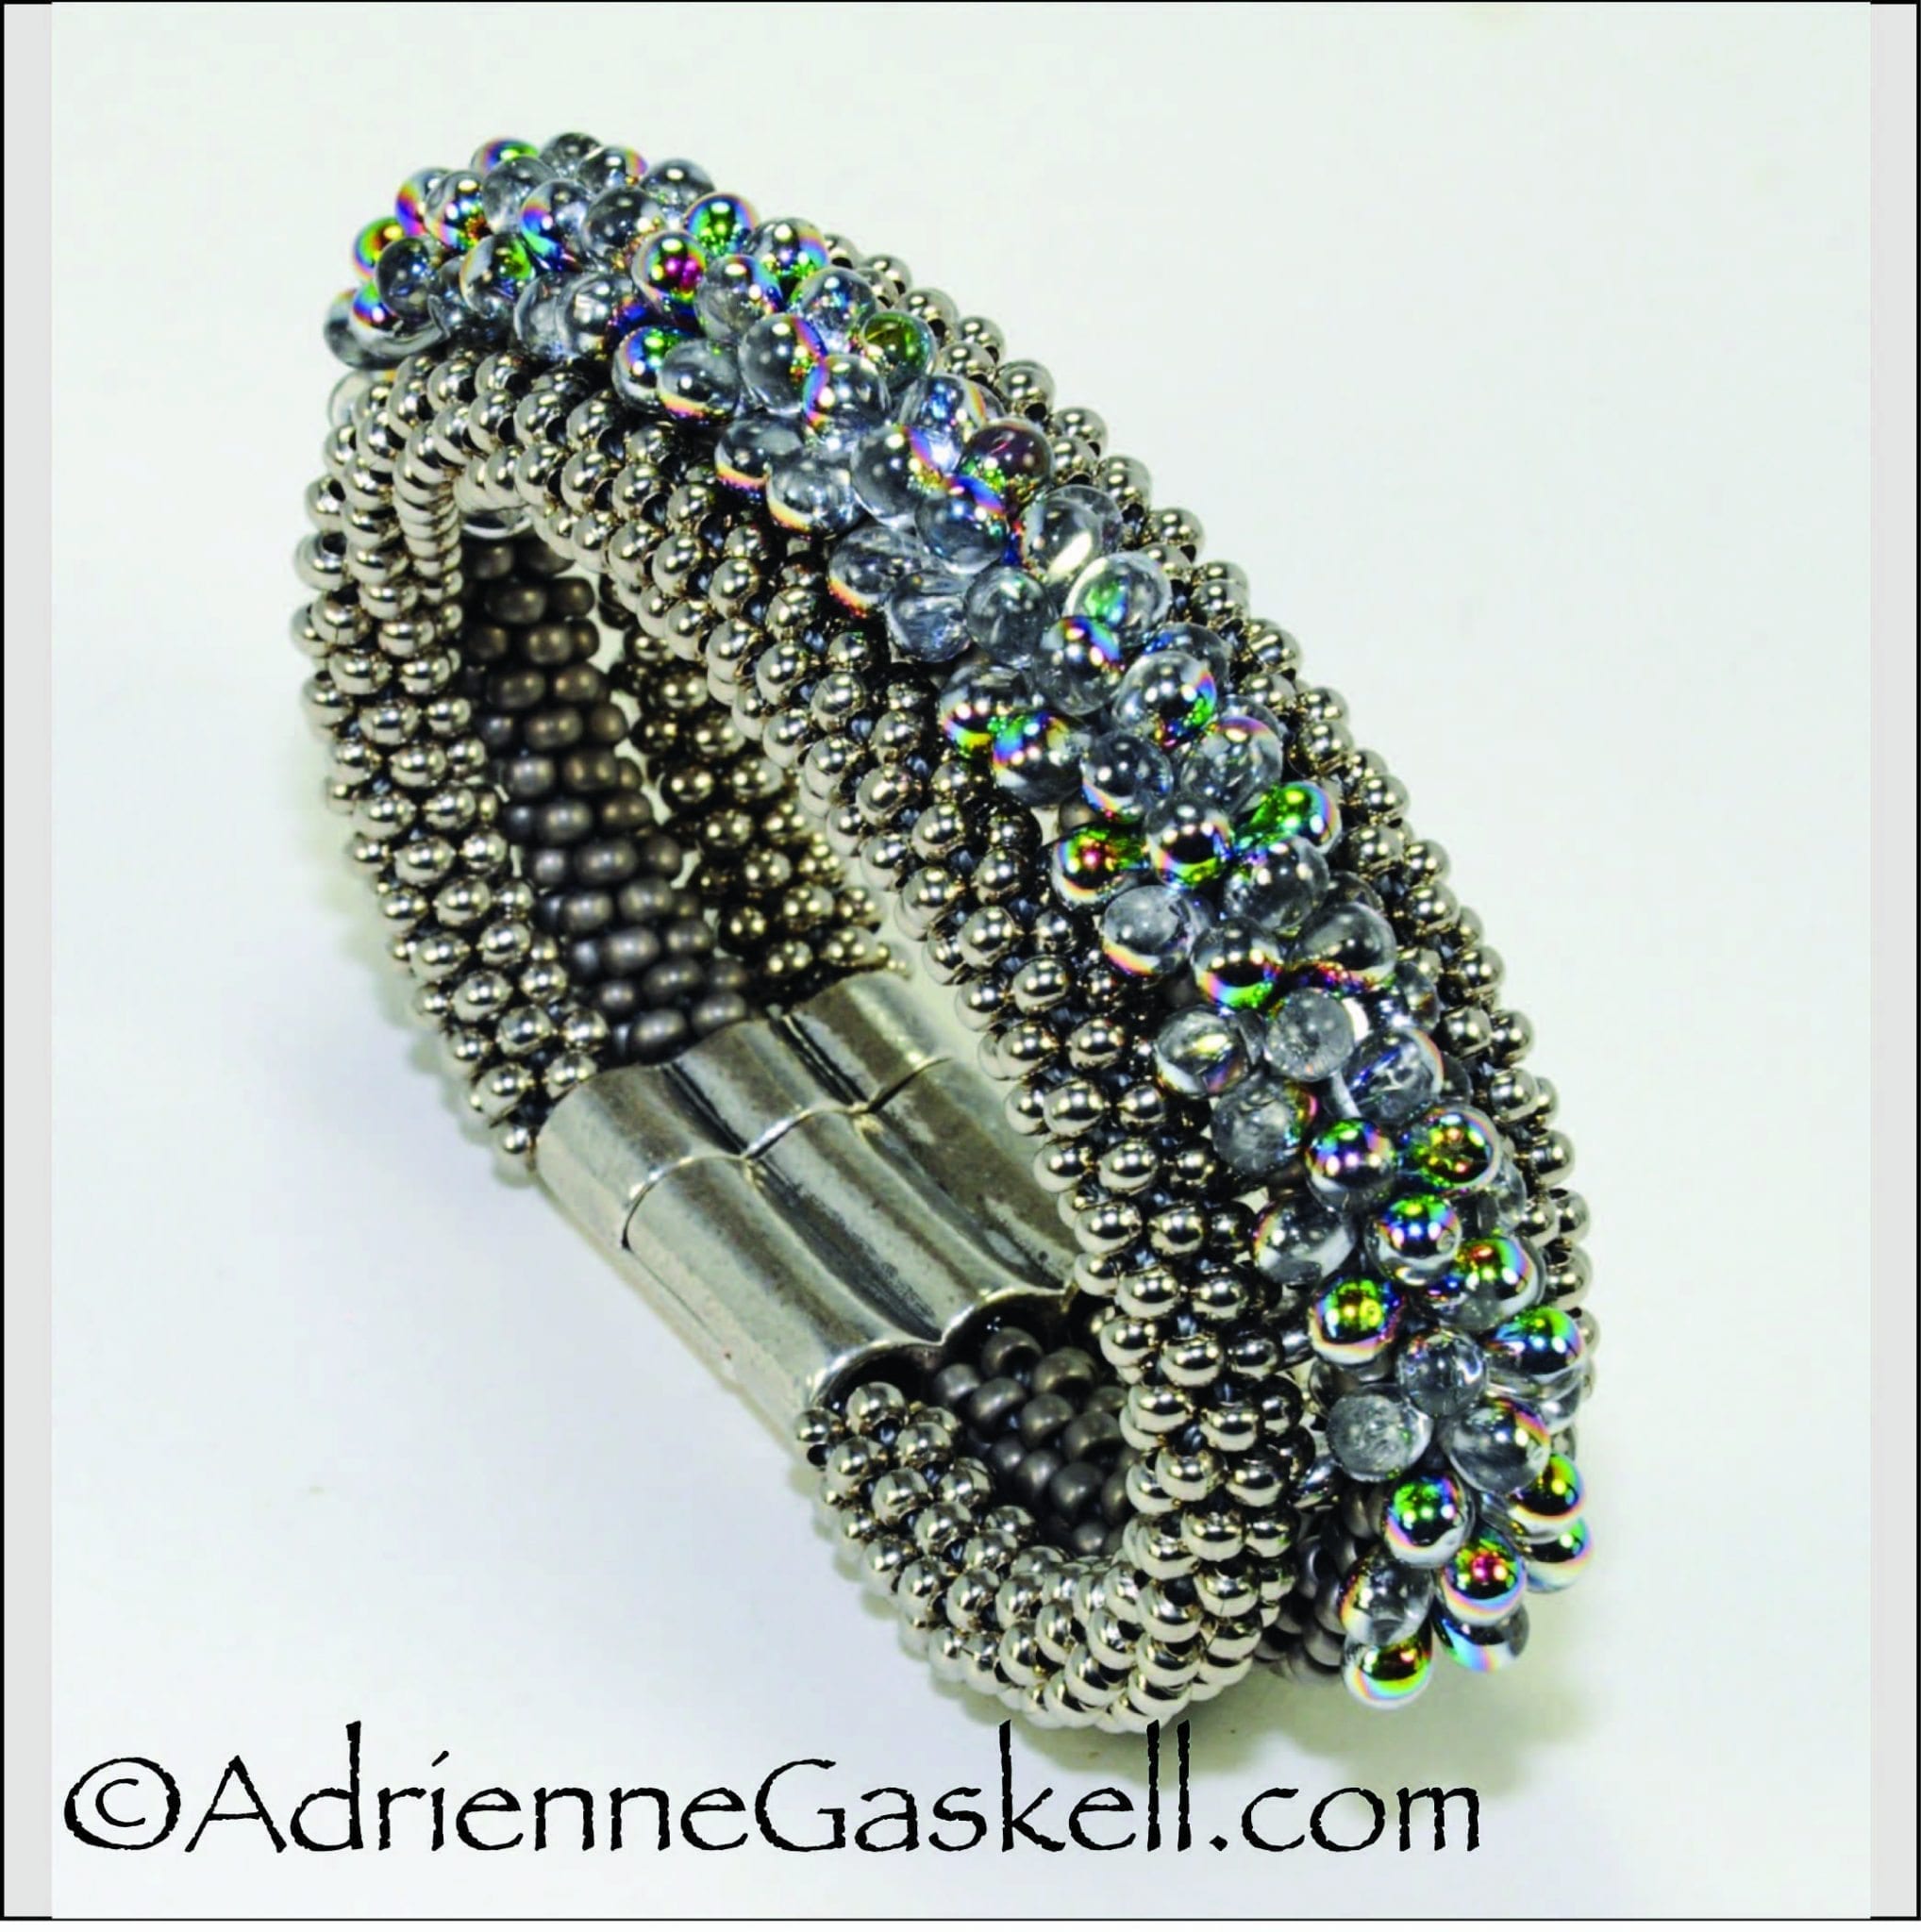 This project was featured in Bead & Button Magazine as Elegant Ombre Braids, December 2019. This bracelet achieves dimensional impact by stacking and then joining three separate braids together. Czech teardrop beads with a rainbow AB finish are the crowning glory.